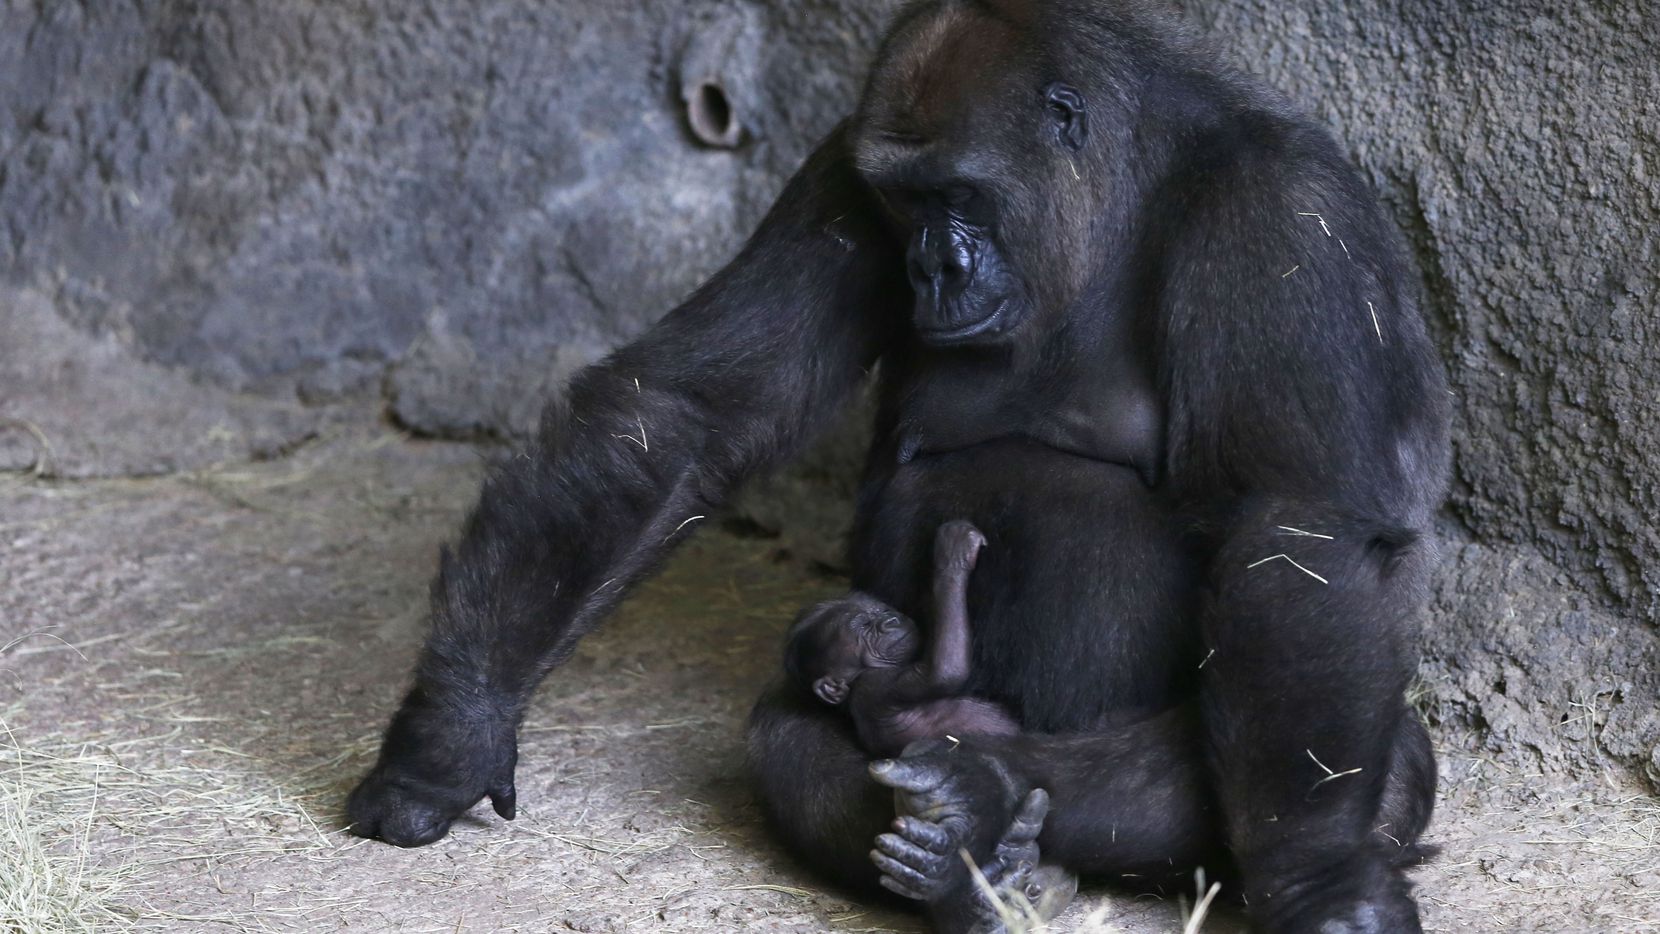 Hope looks at her baby gorilla at the Dallas Zoo on July 5, 2018.